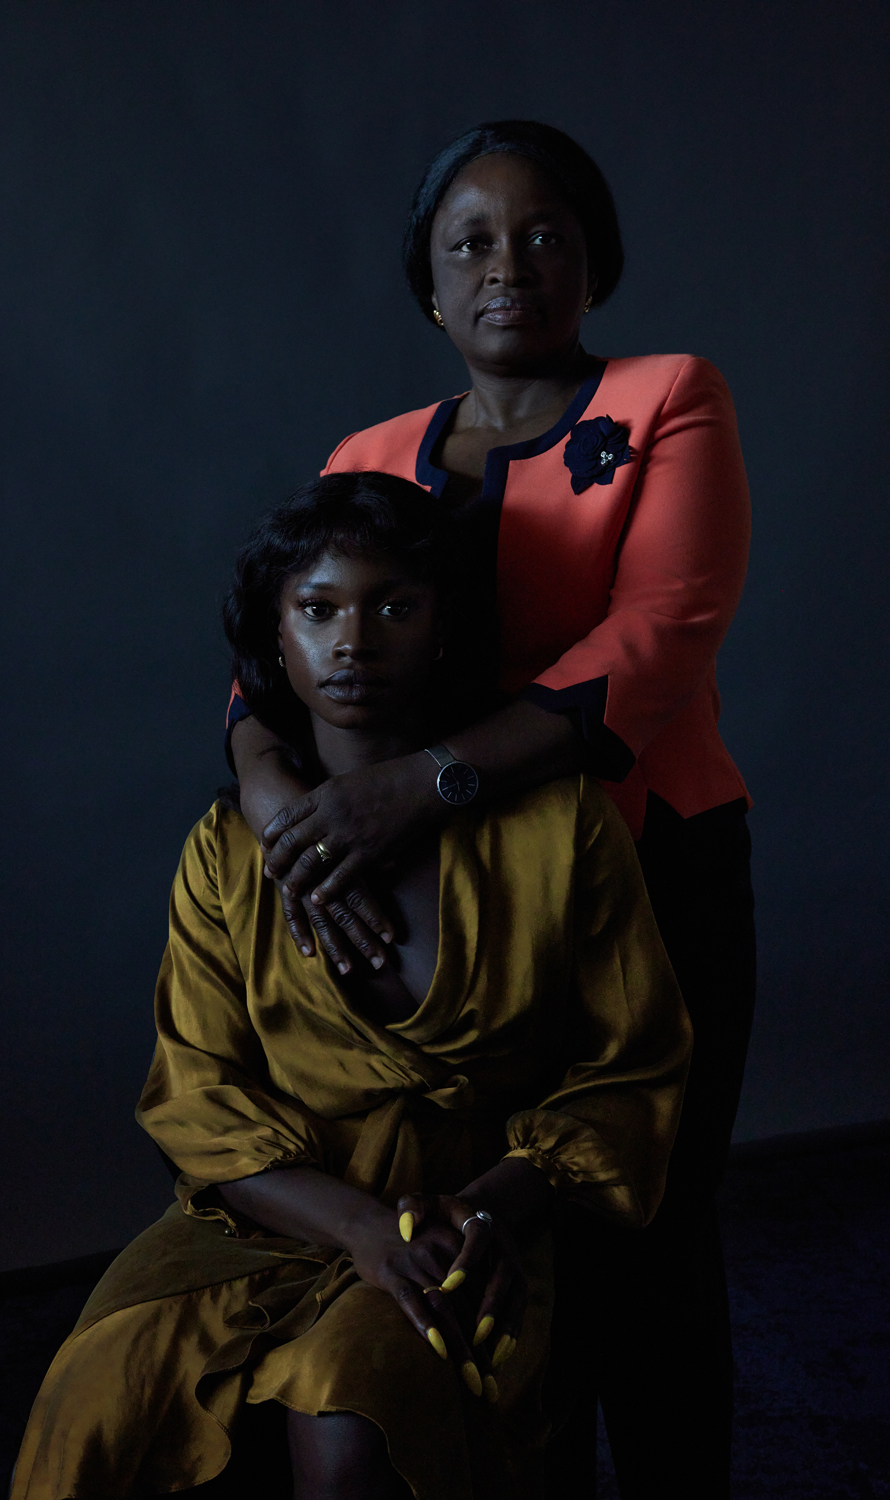 Olayide Ogunsiji (standing) works with spokesperson Fatu Sillah (seated) to increase the resources available to those living with the impacts of female genital mutilation/cutting in Australia.